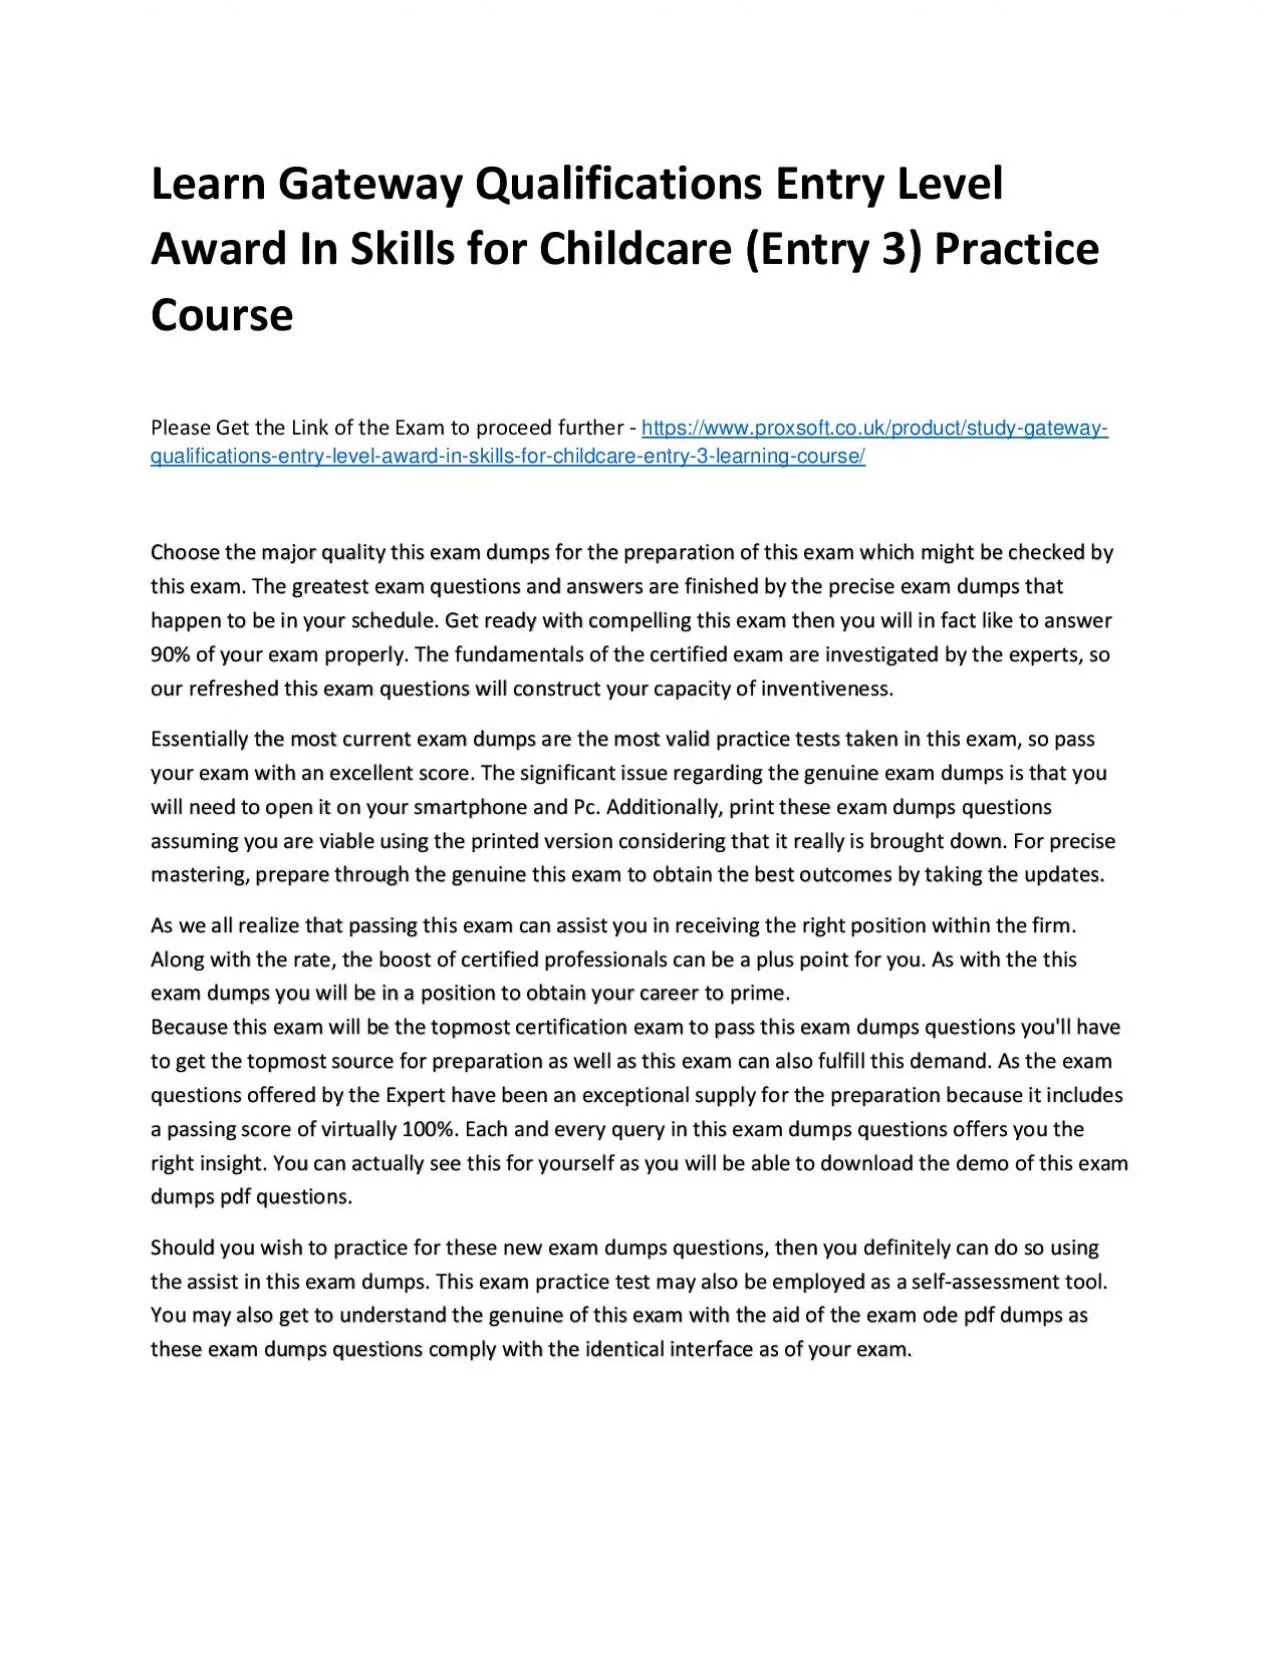 Learn Gateway Qualifications Entry Level Award In Skills for Childcare (Entry 3) Practice